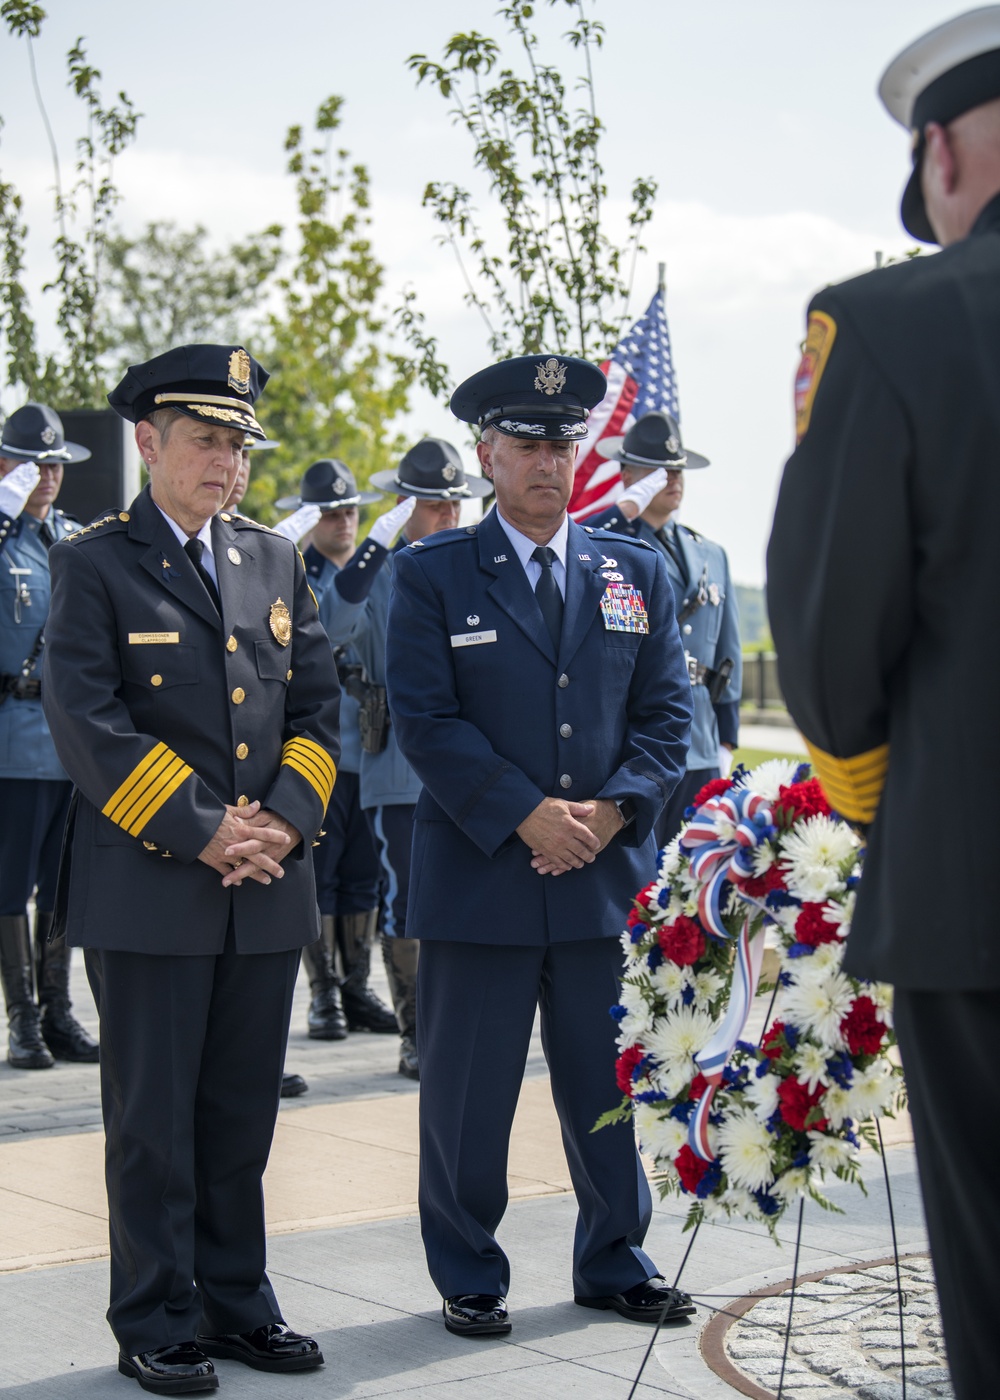 DVIDS - Images - Colonel Peter T. Green III speaks at 9/11 Remembrance ...